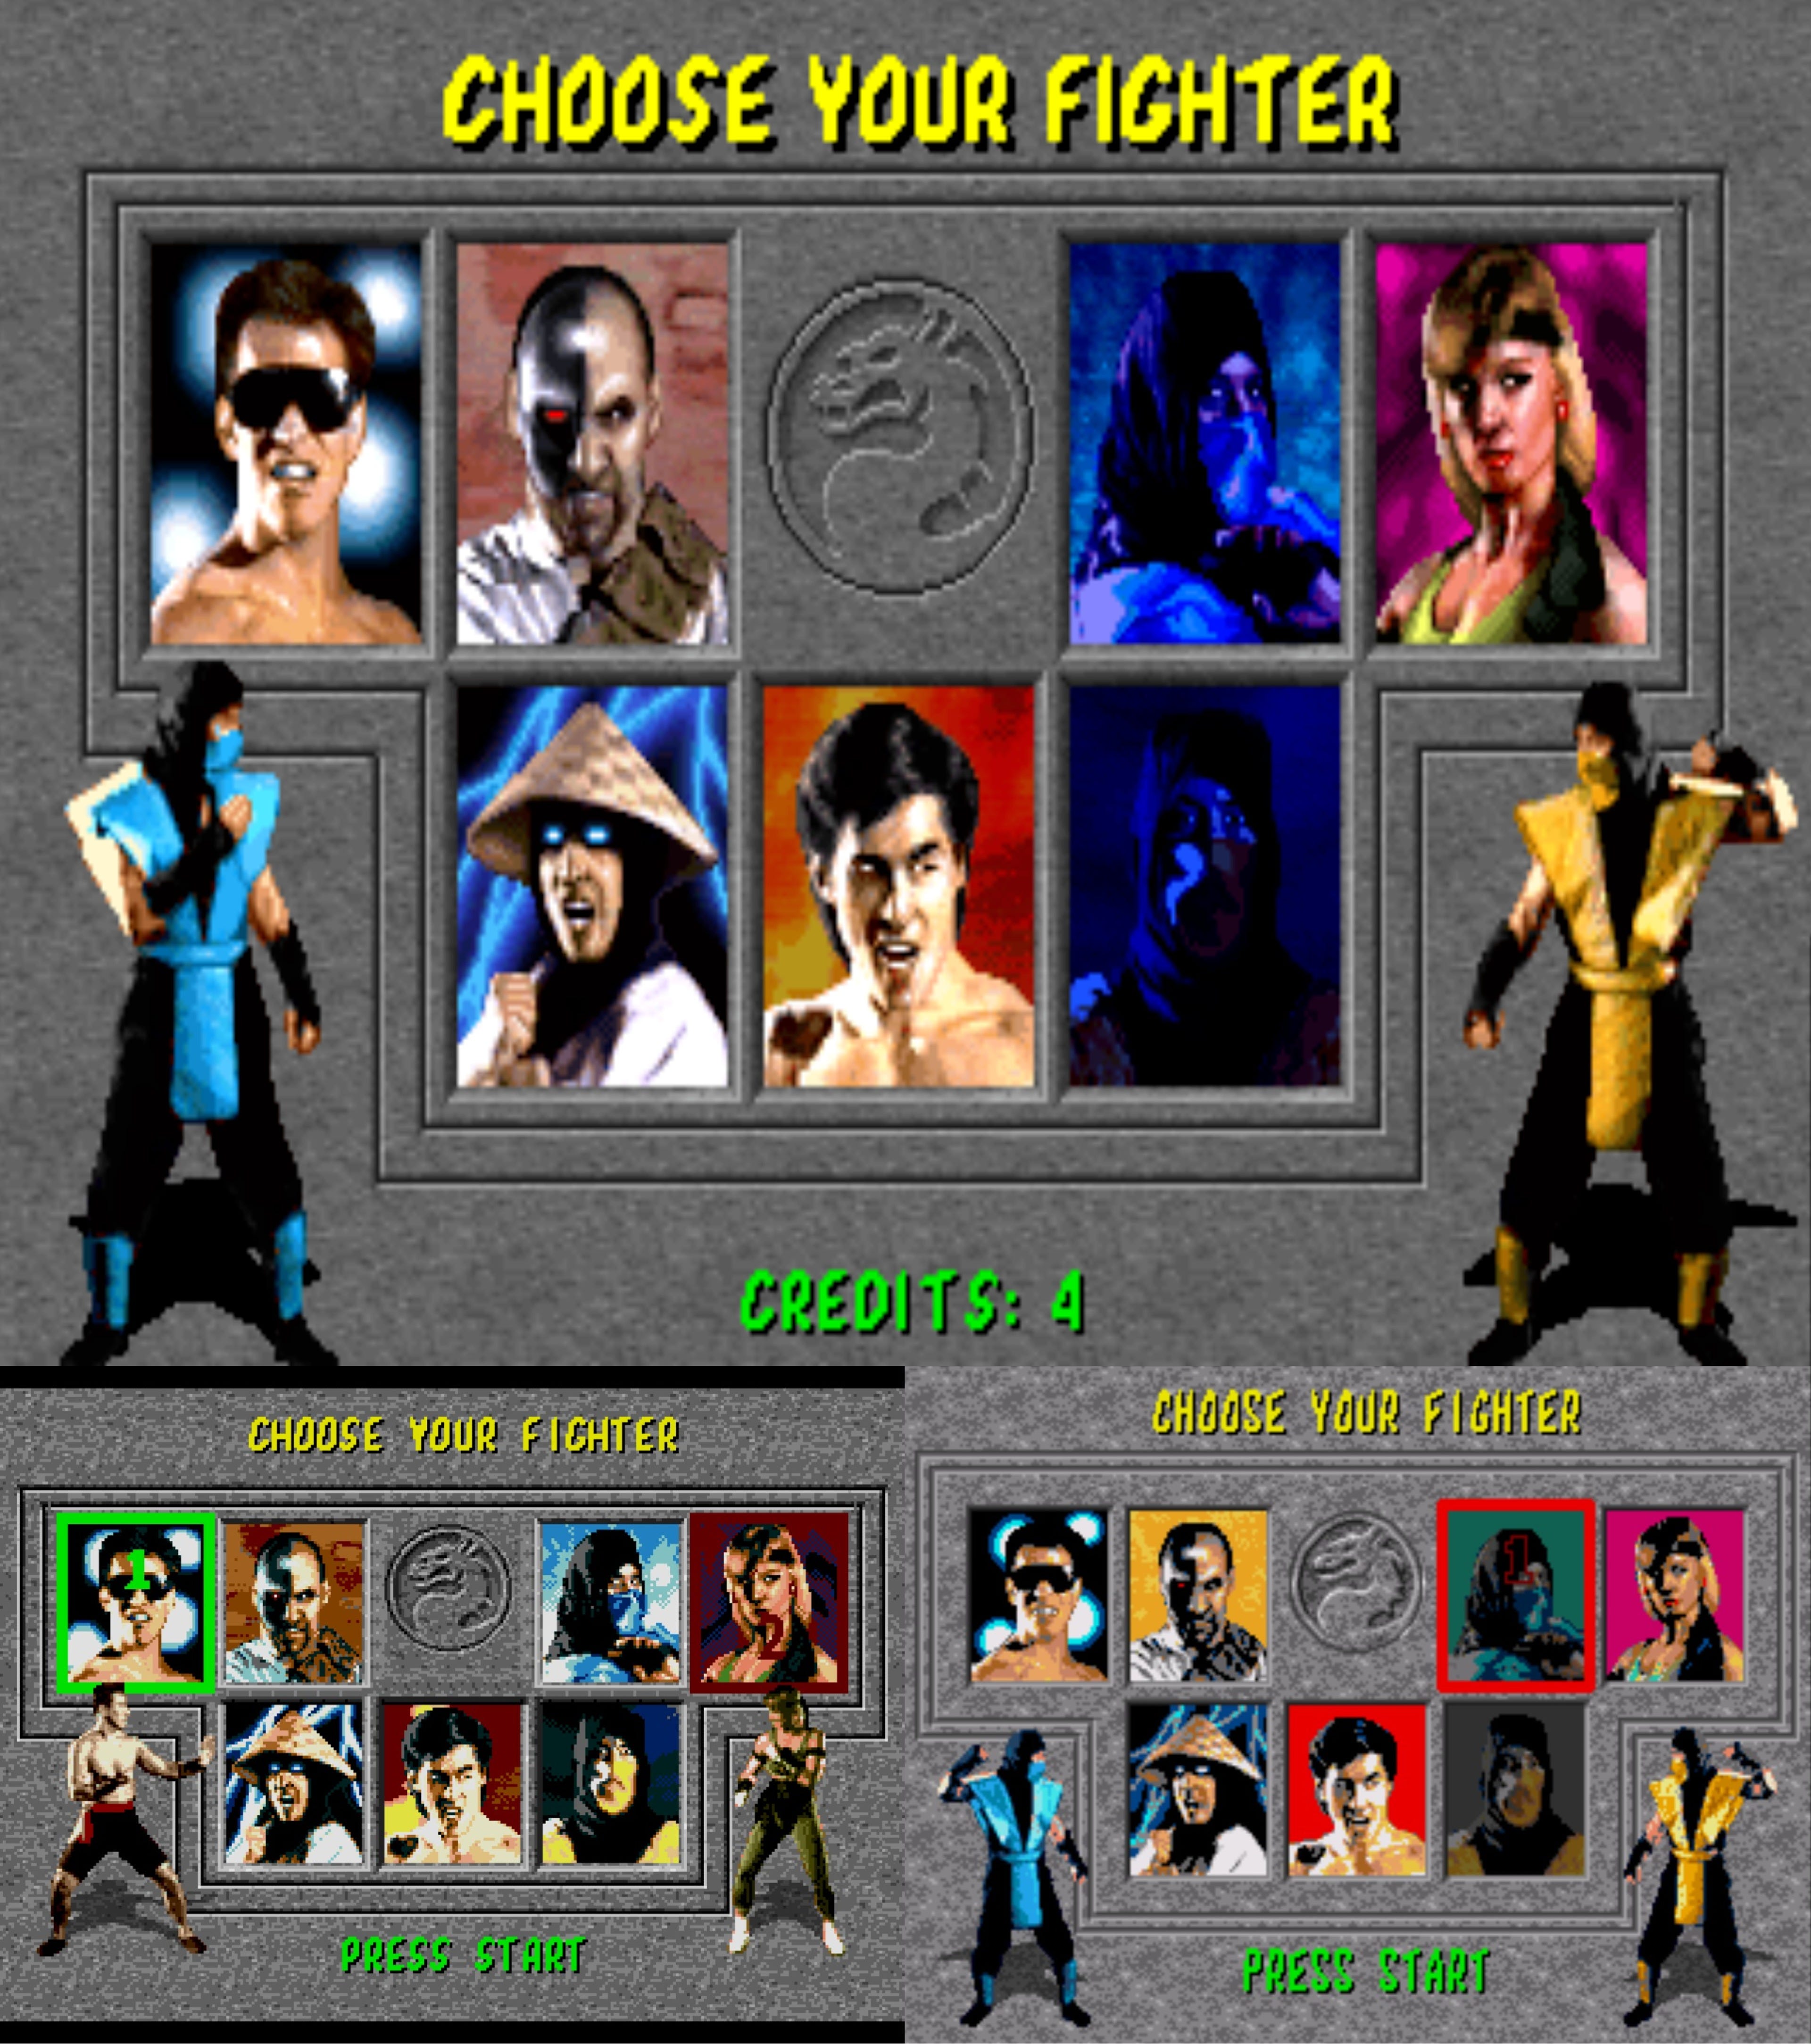 Mortal Kombat 1 [SNES]. No don't get too excited - the CPU is